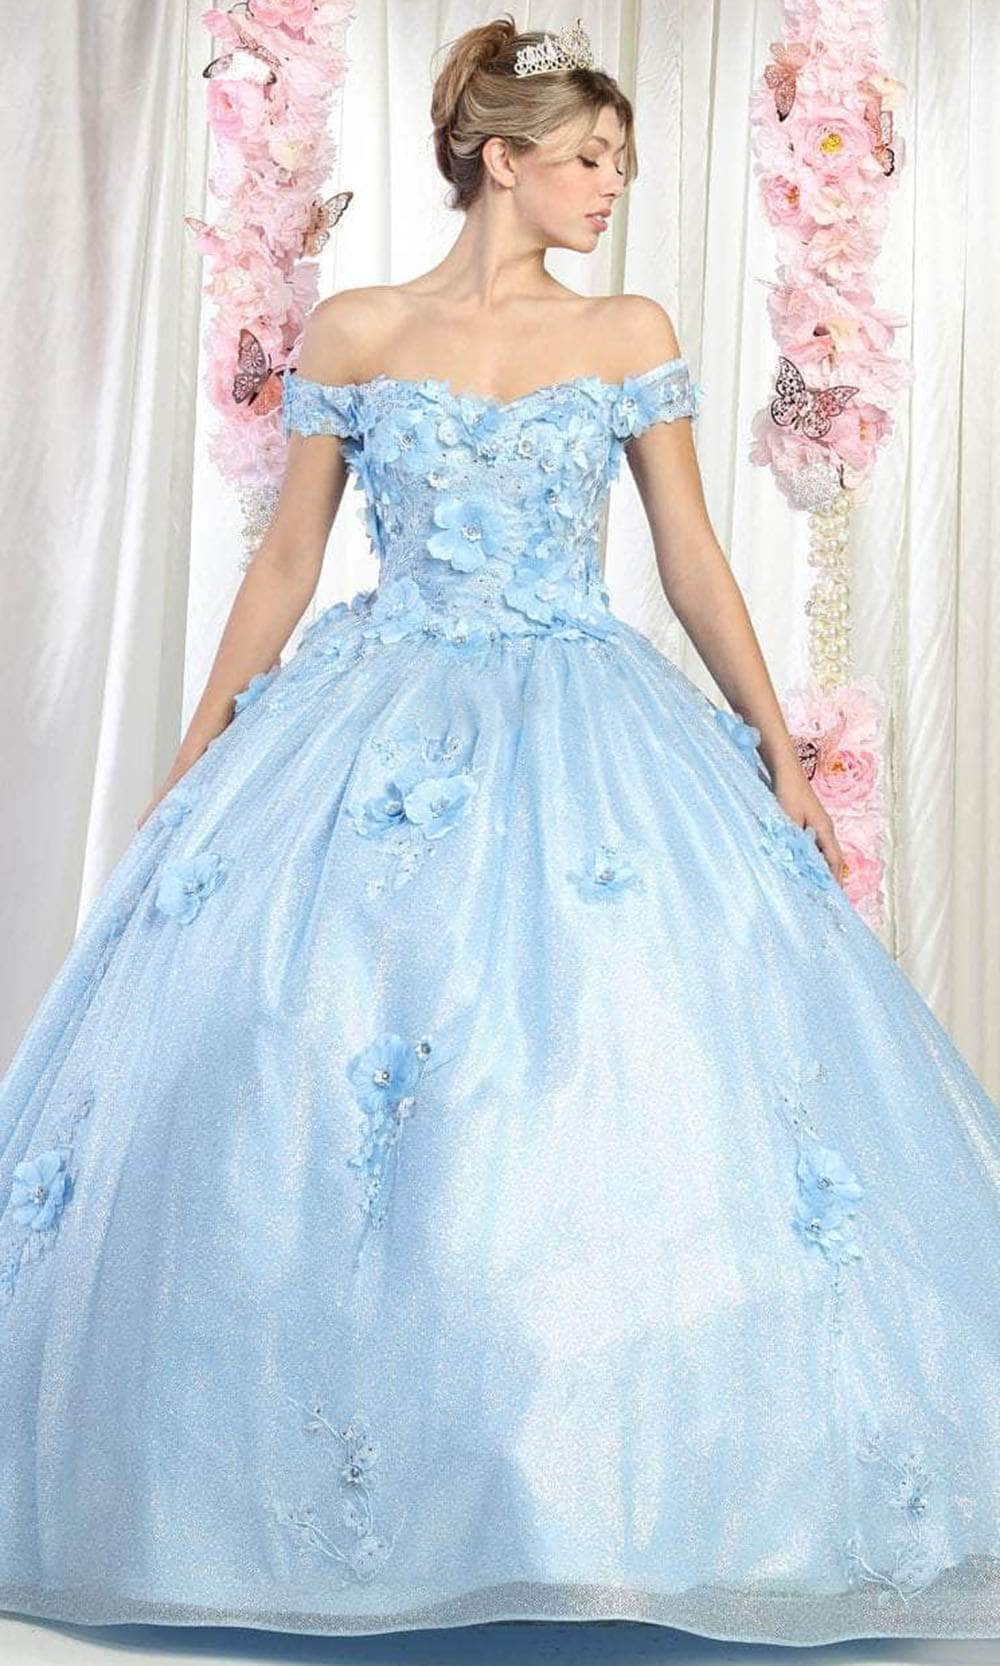 Dancing Queen - 1623 V Neck Floral Glittered Ballgown – Couture Candy